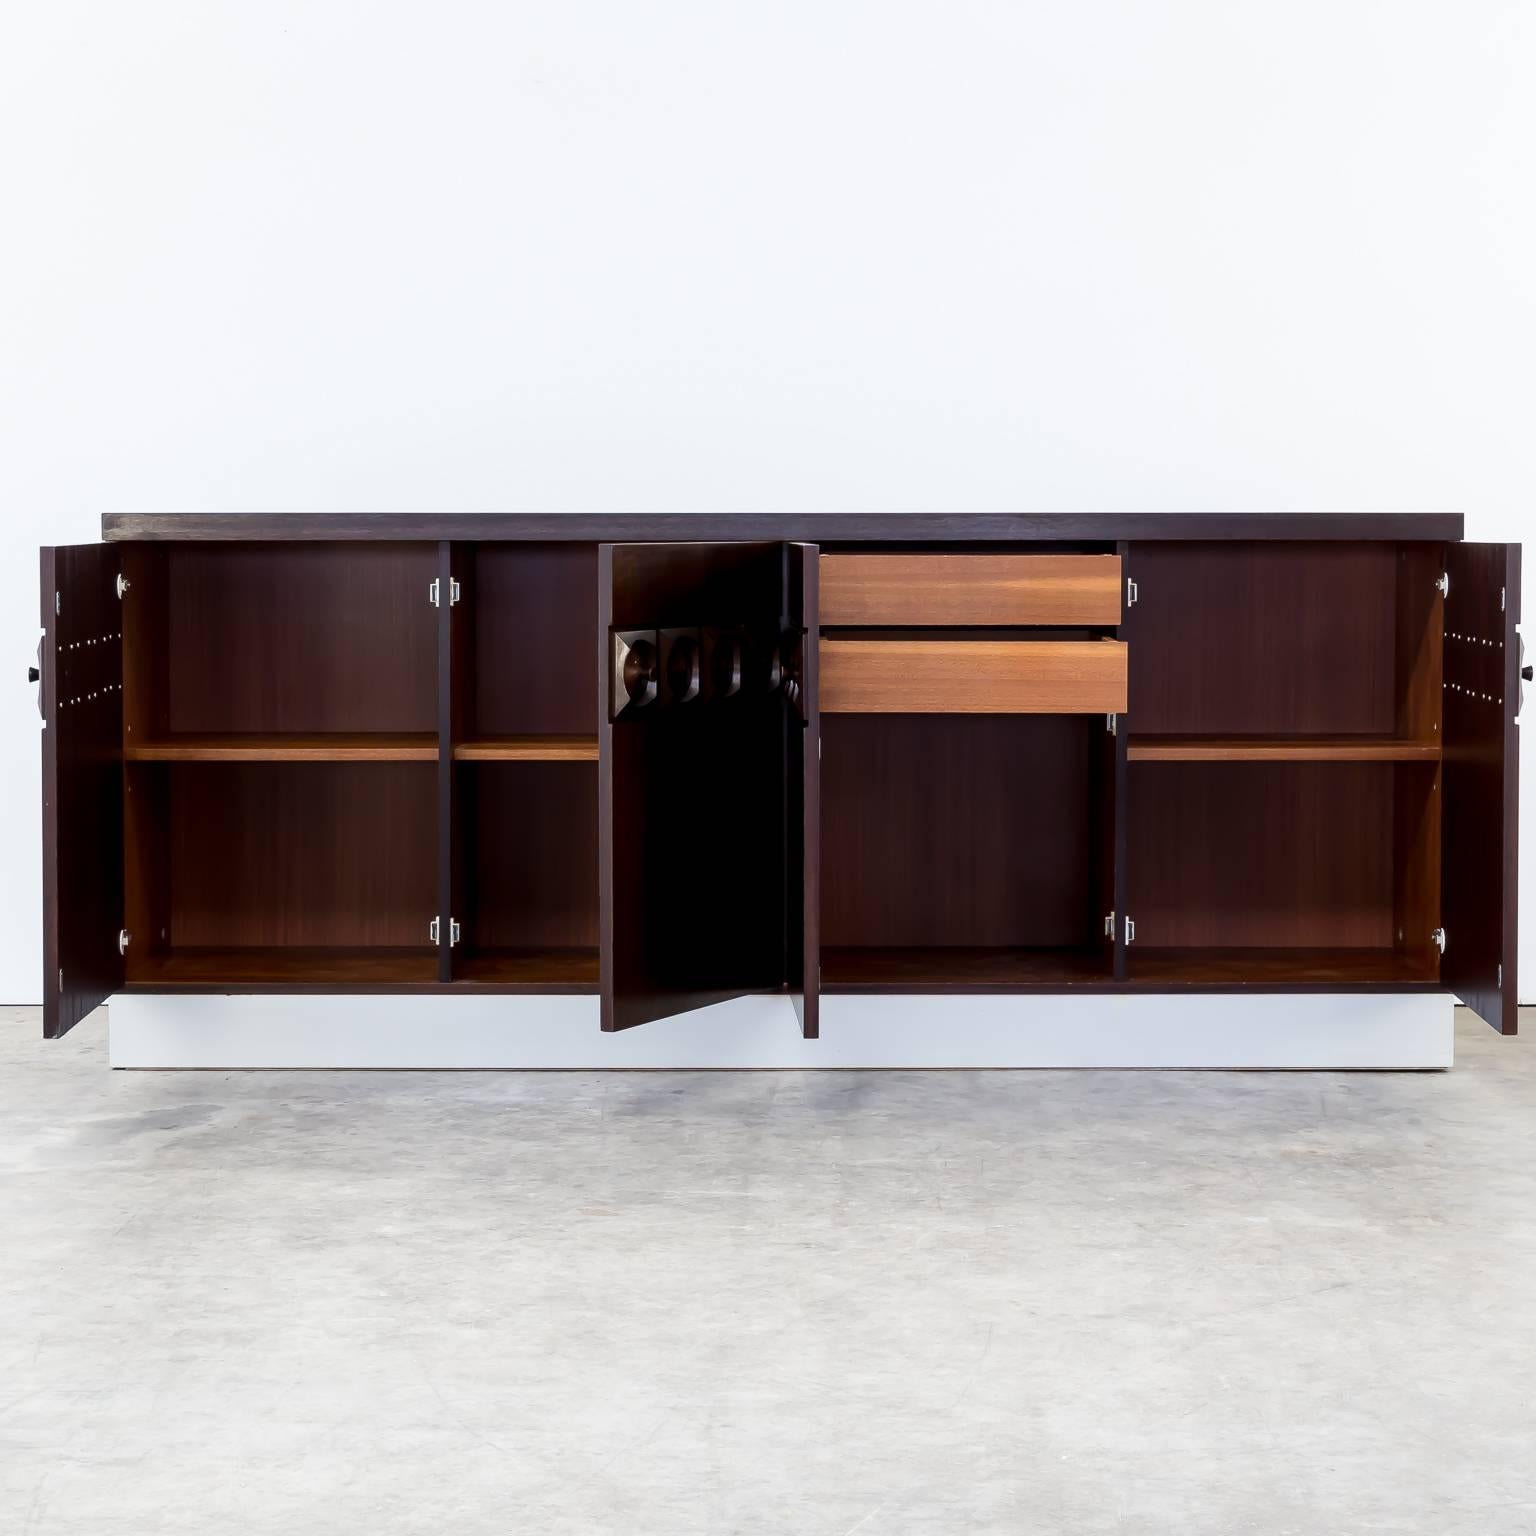 1970s Belgian Brutalist credenza sideboard attributed ‘de Coene’. Red/brown teak, silver plint. Original condition, wear consistant with age and use. Dimensions: 220cm (W) x 50cm (D) x 91.5cm (H).